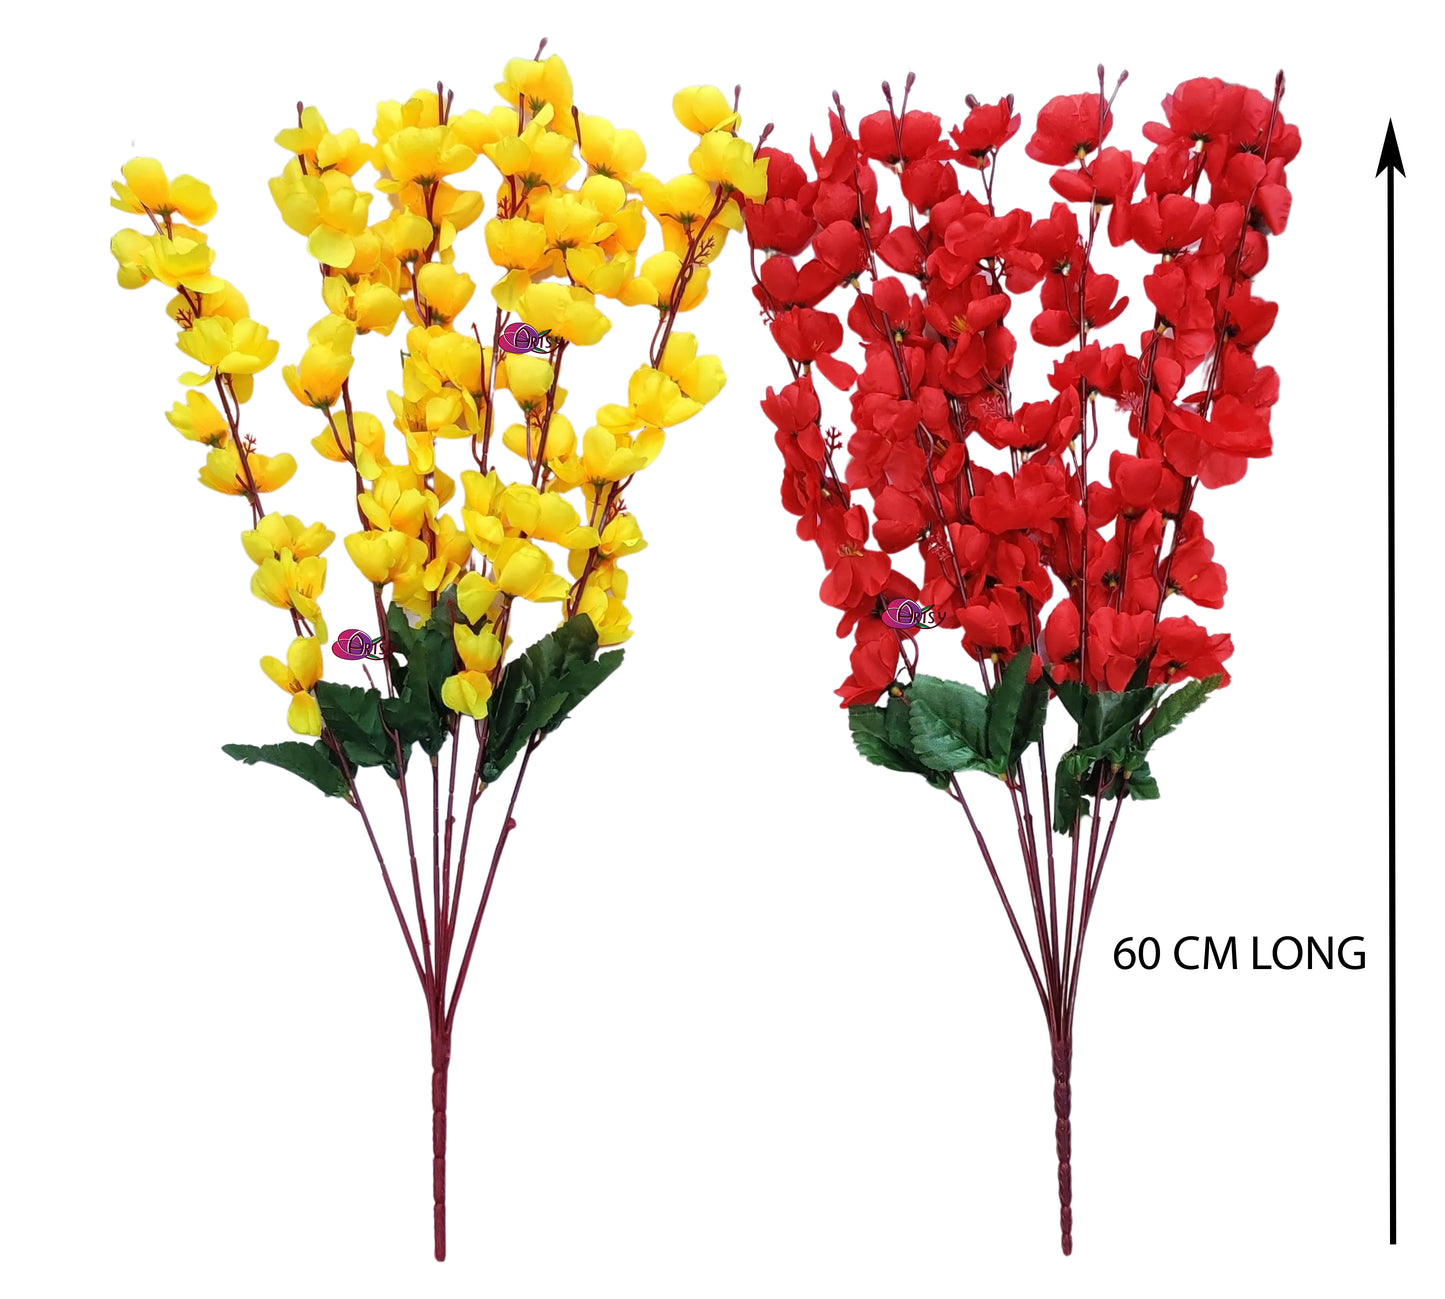 ARTSY® Artificial Flowers For Home Decoration Cherry Blossom Flower Bunch For Vase , Office Decor, Without VASE, Combo (Yellow Red , Pack of 2 Pieces)